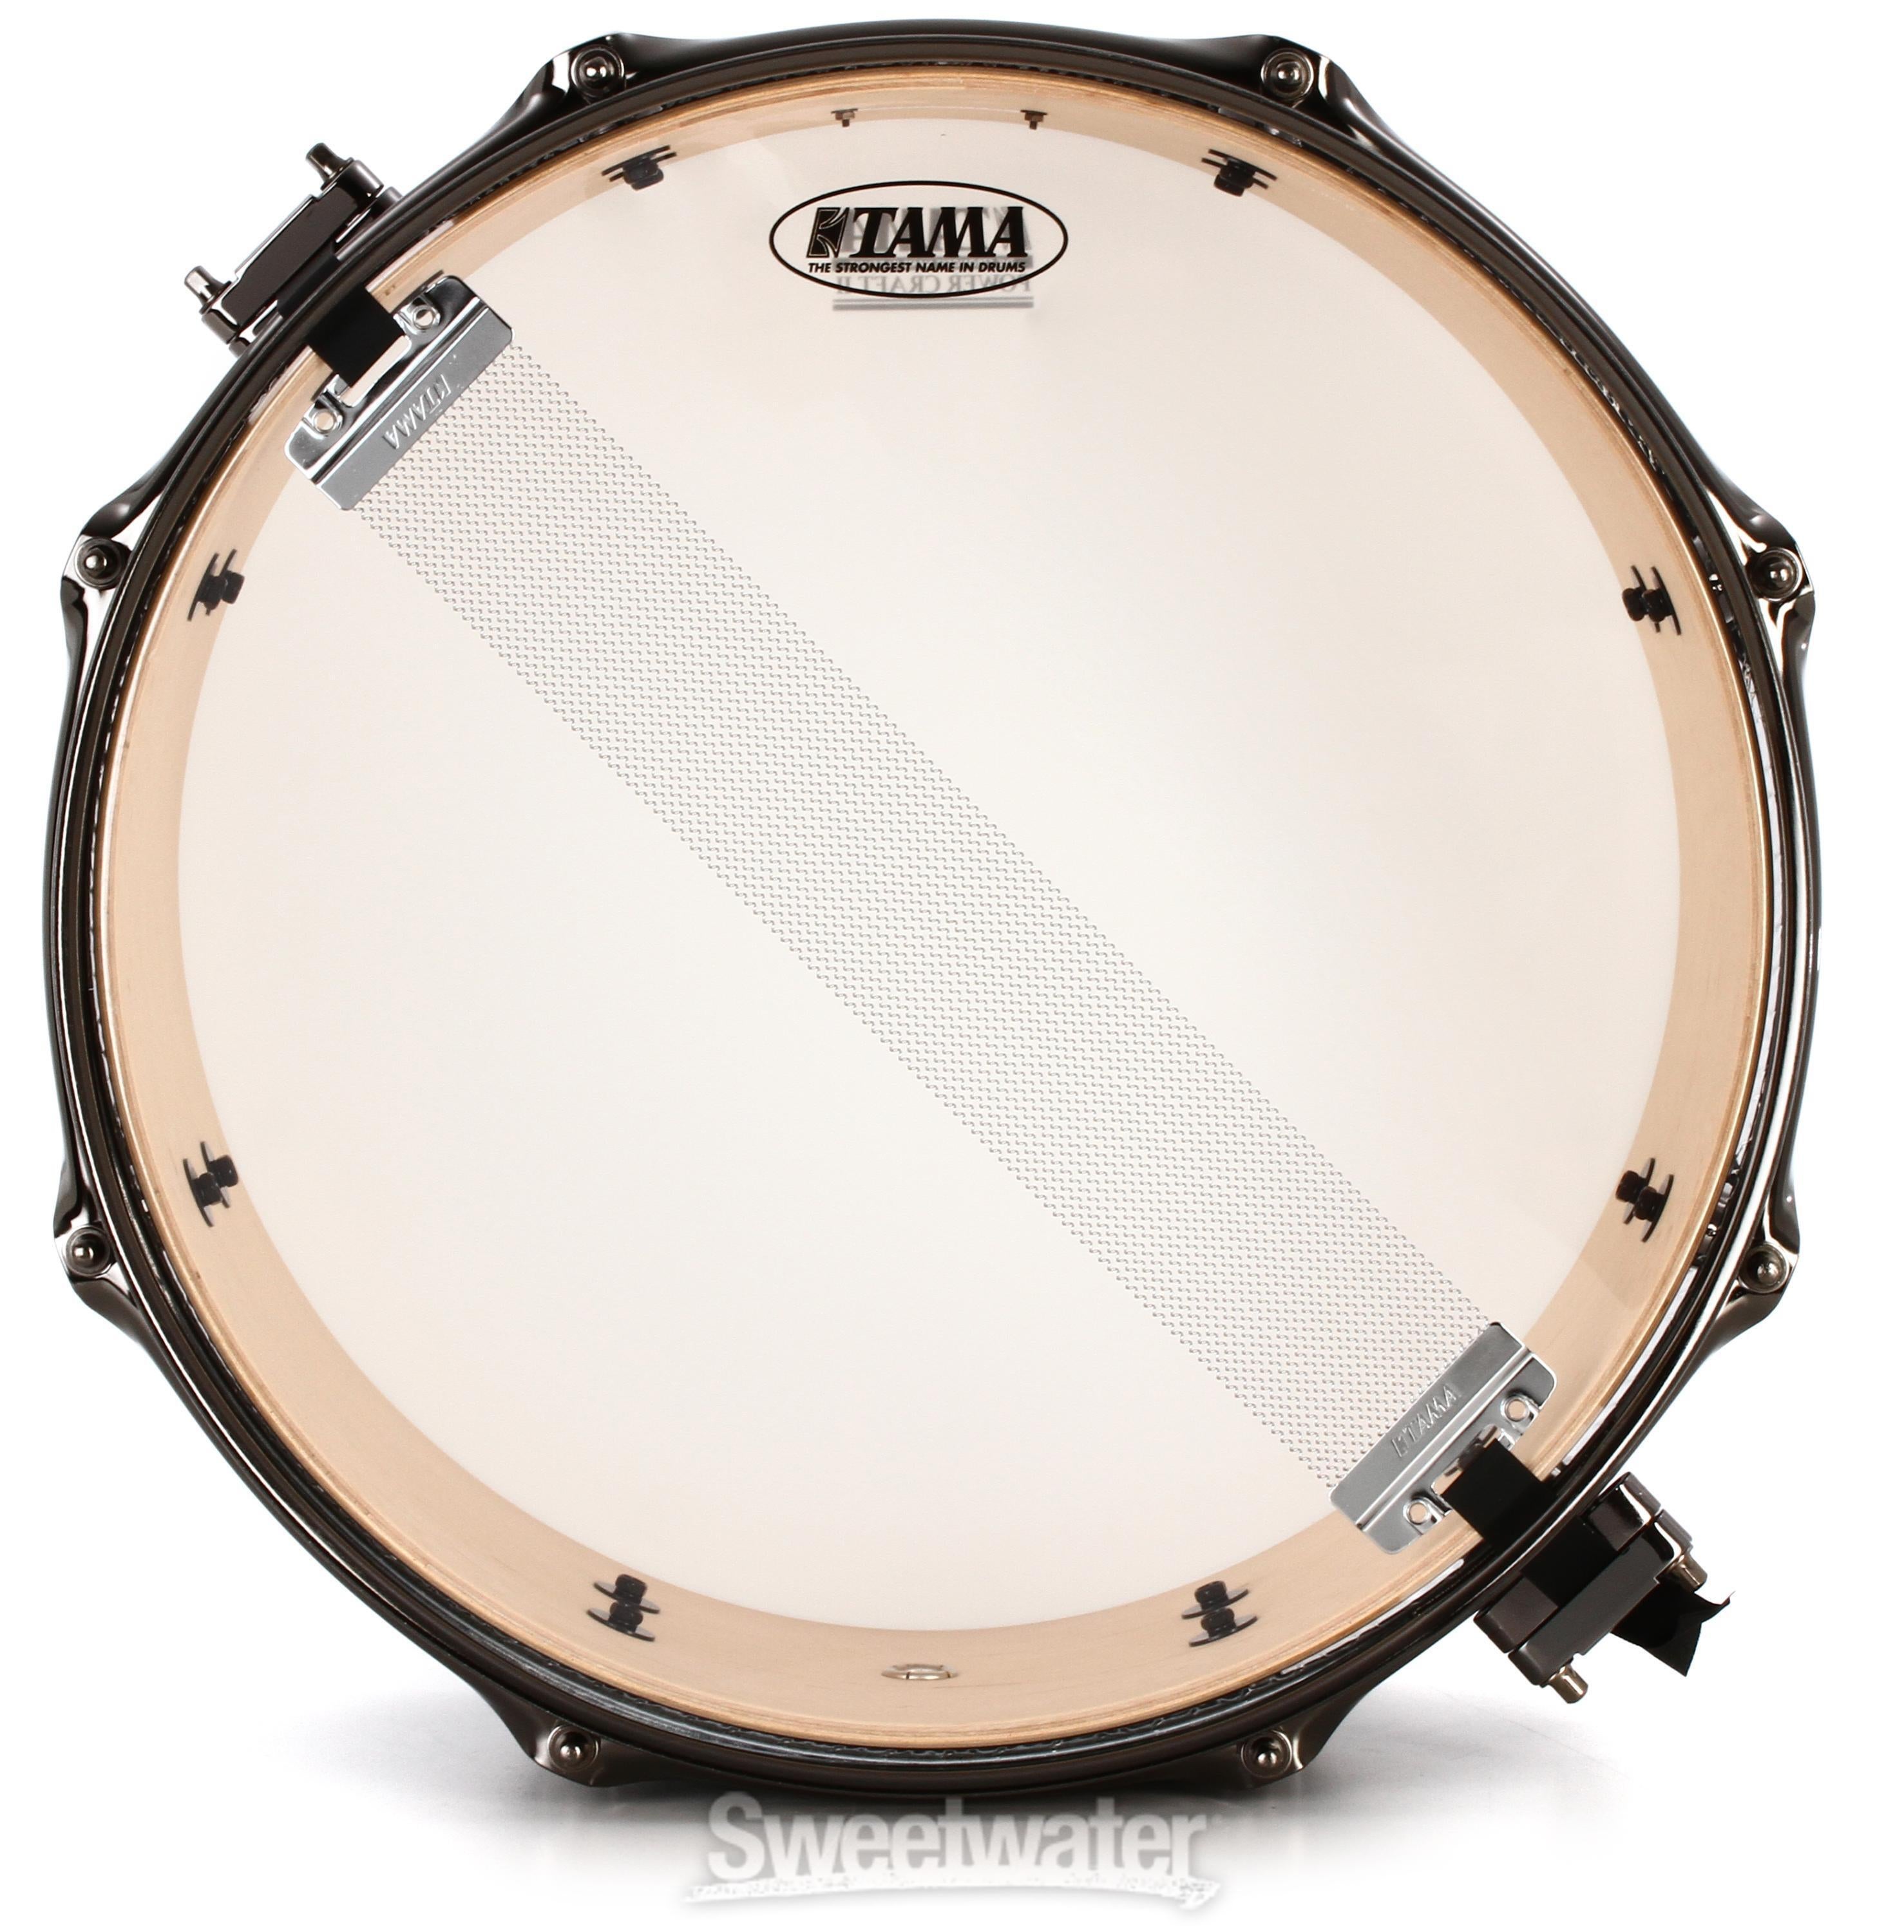 Tama Limited Edition Artwood Maple Snare Drum - 6.5